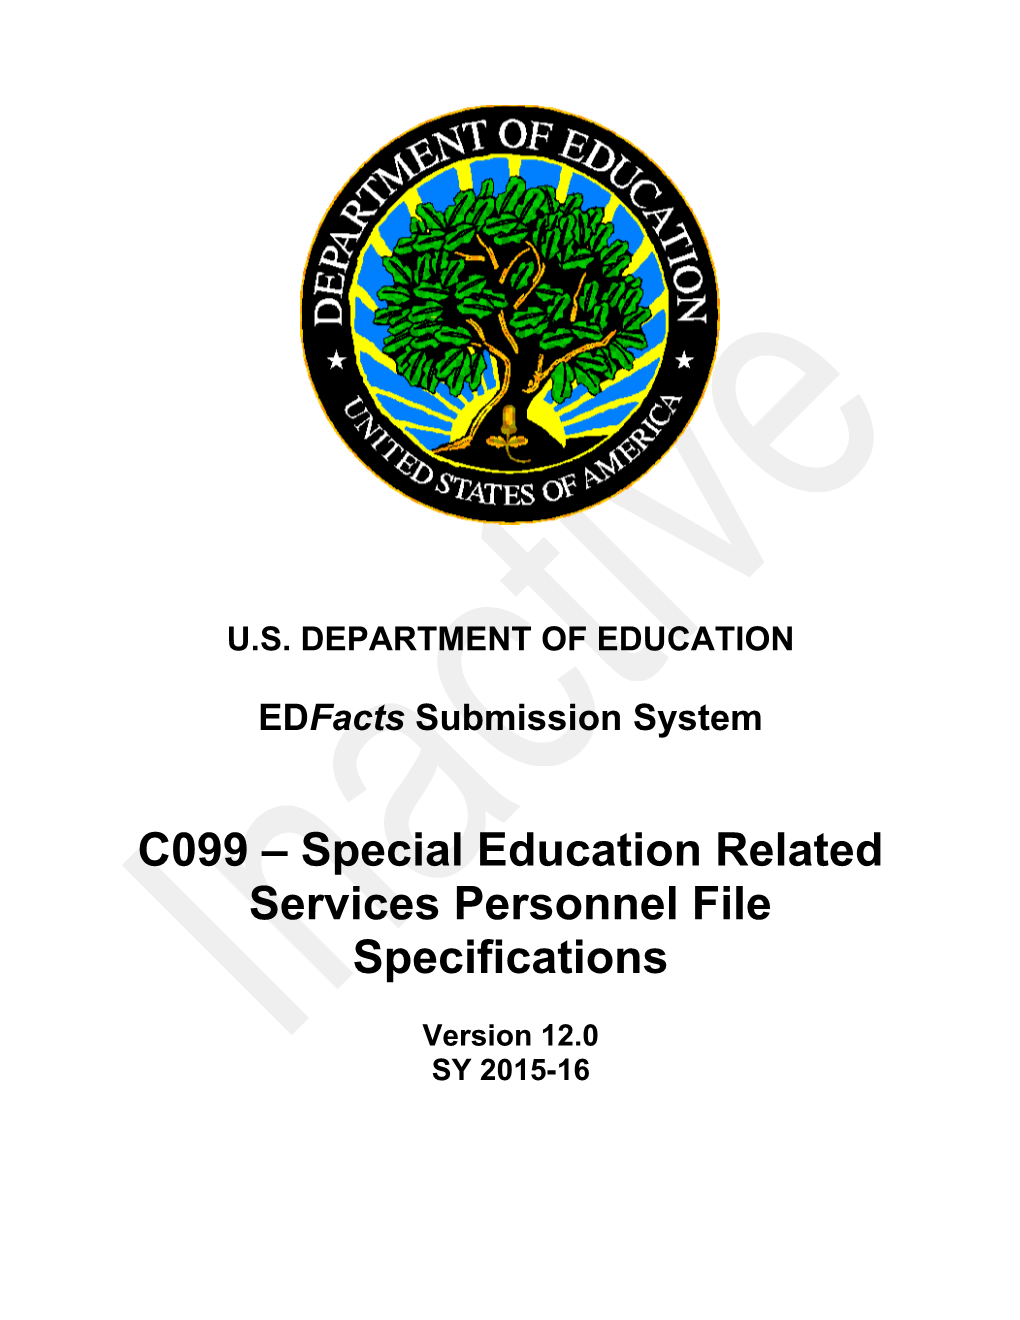 Special Education Related Services Personnel File Specifications